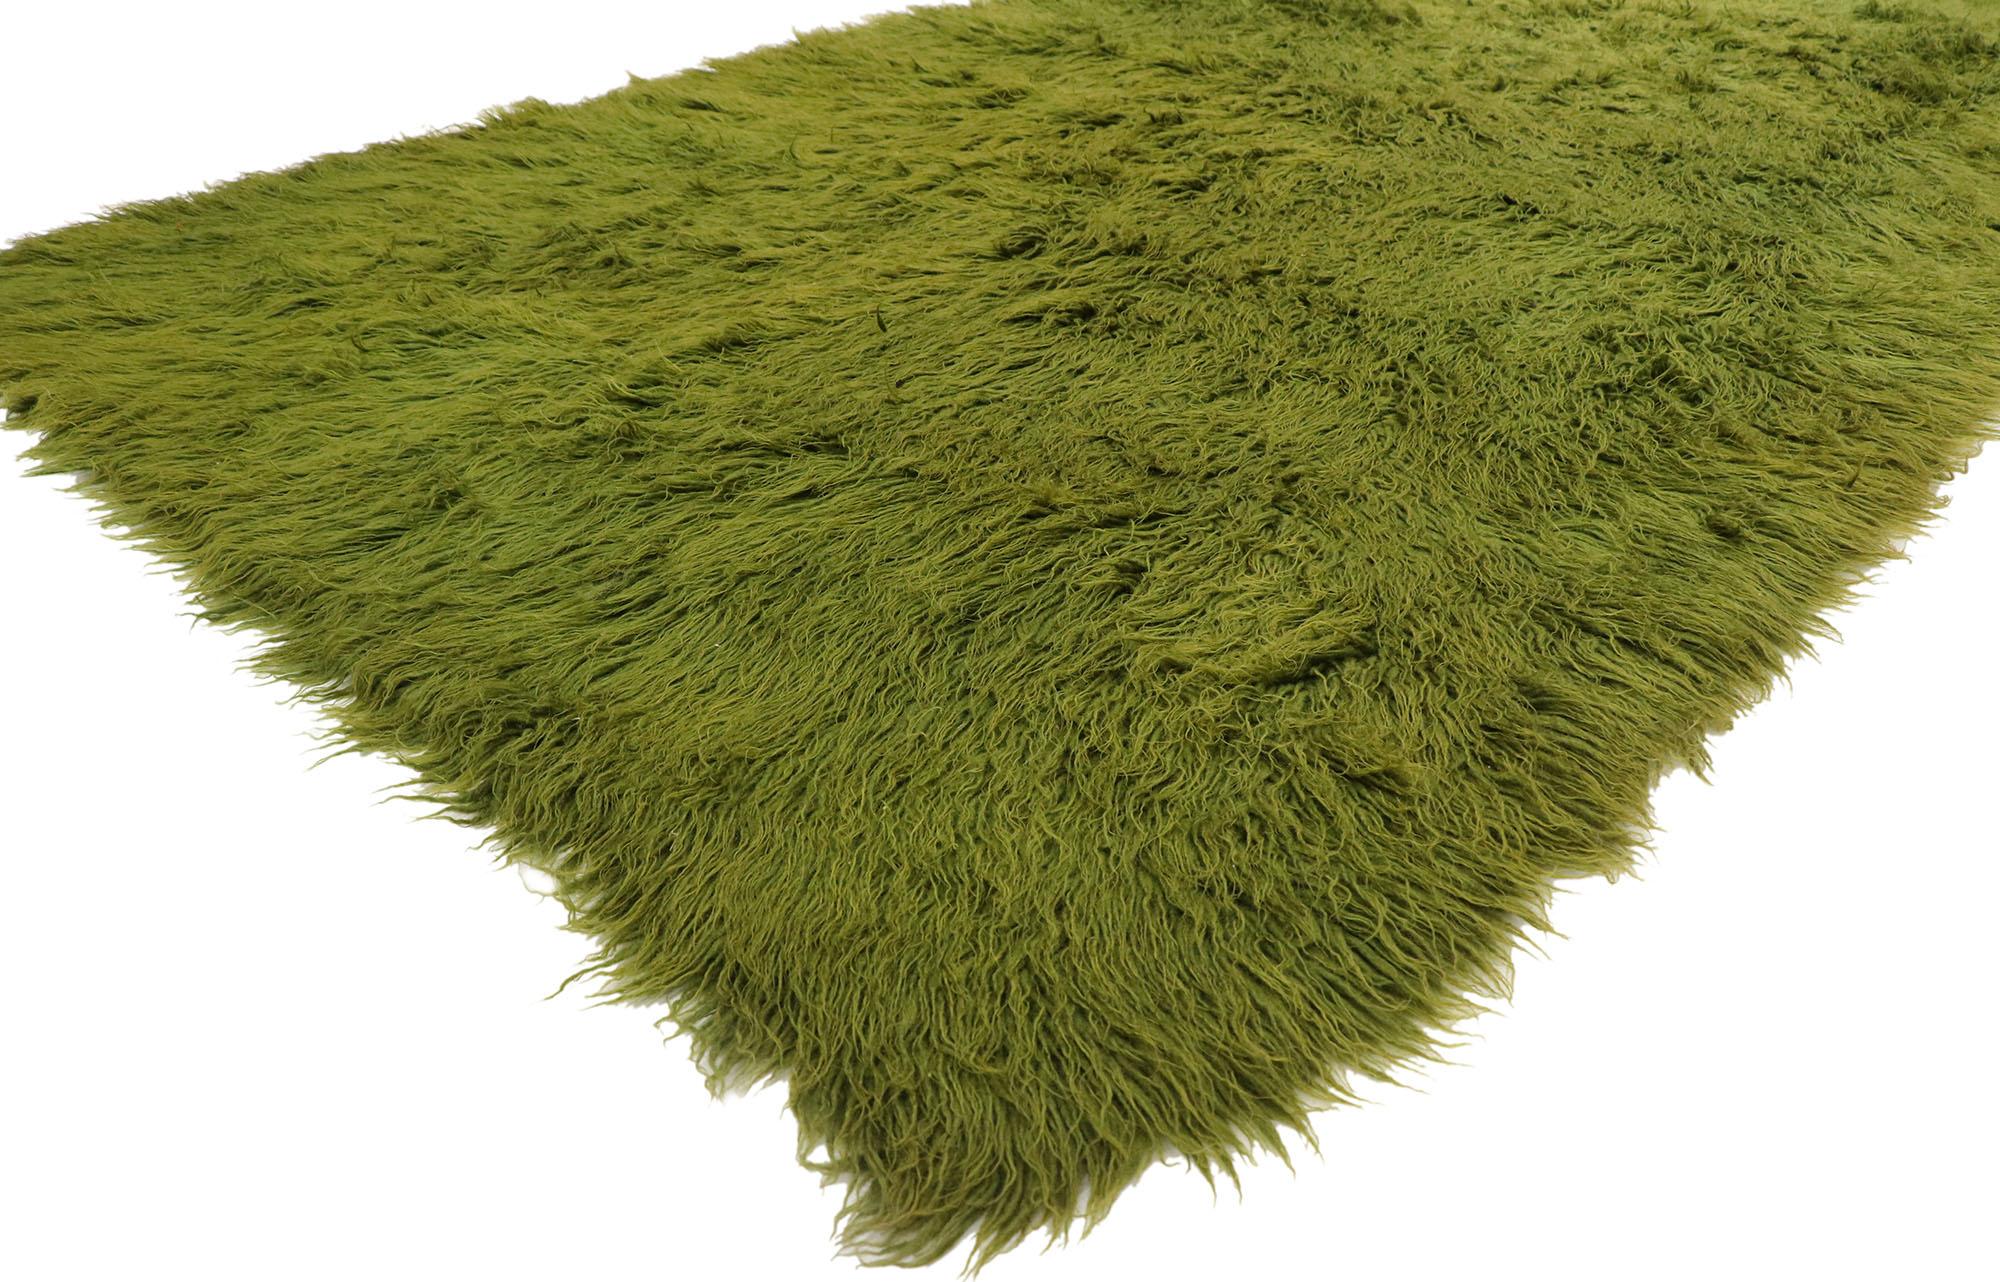 78061 vintage Greek Flokati rug with Modern Biophilic design 06'00 x 10'00. Effortless, elegant, and casual meets the eye in this hand-woven wool vintage Greek Flokati rug. The shaggy piled rug features earthy greenish hues and softly gradated